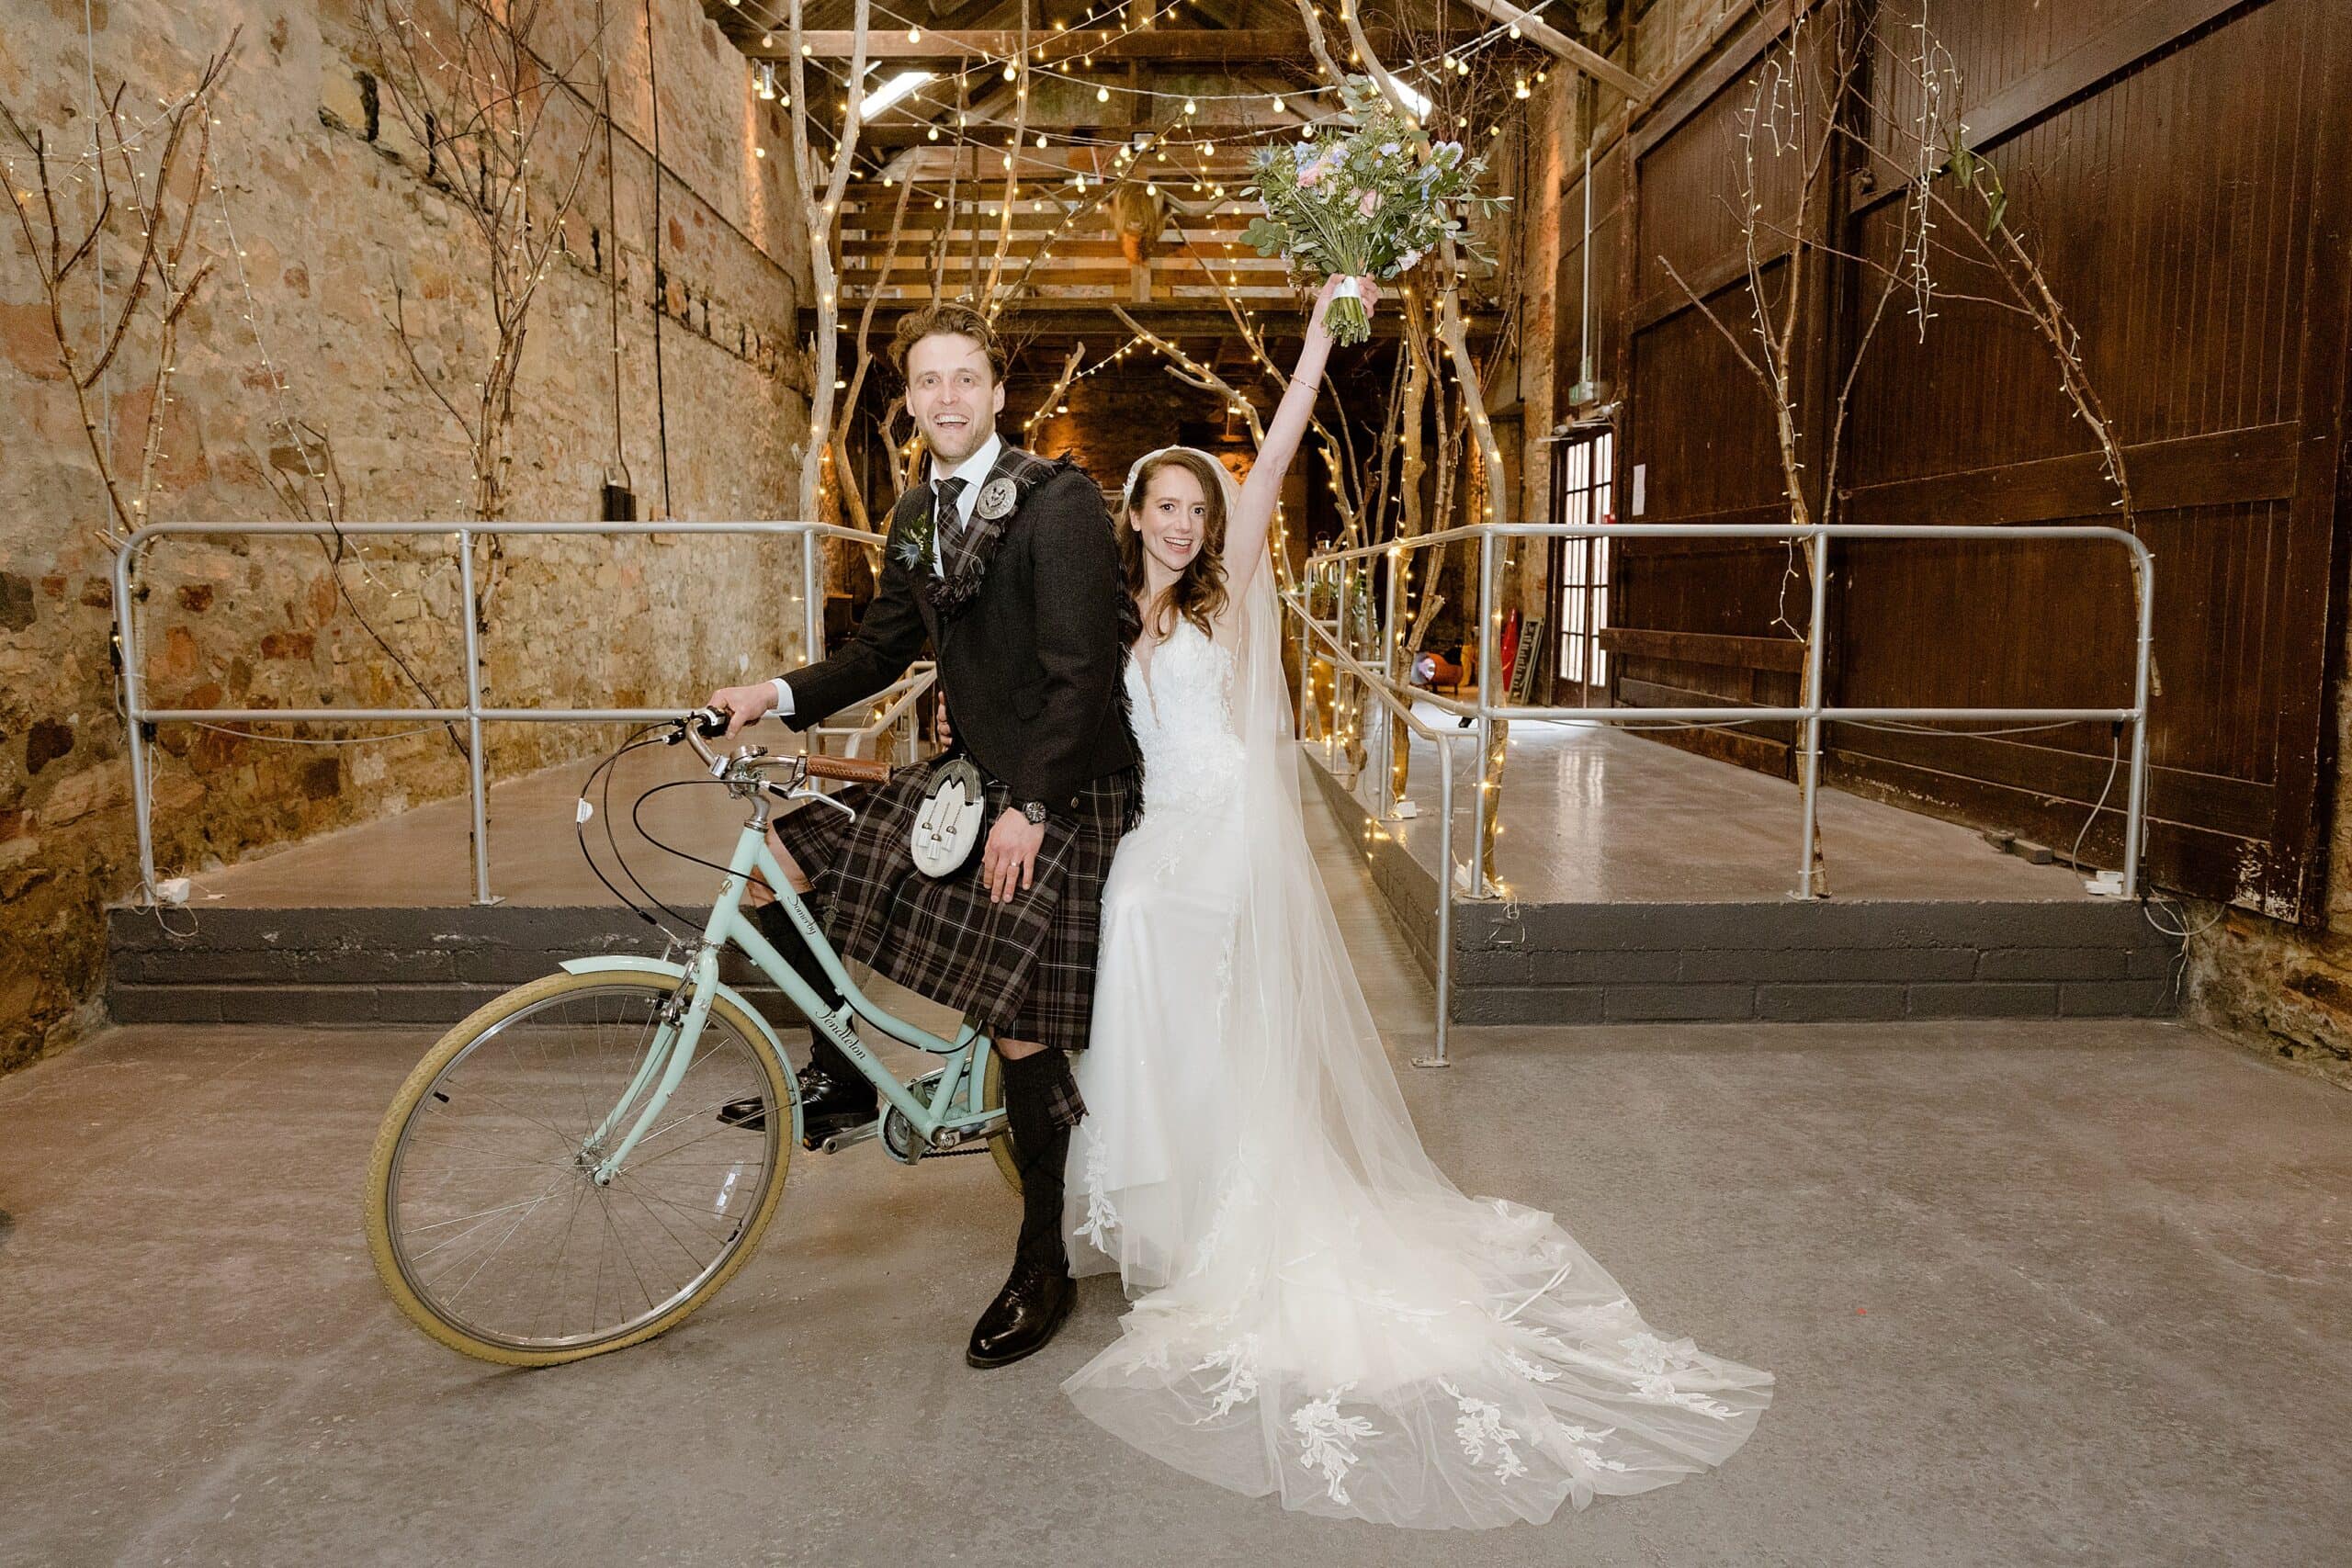 interior inside view of a barn wedding venue showing the bride and groom posing on a bicycle with an archway of branches and festoon lights in the background photographed by st andrews wedding photographer